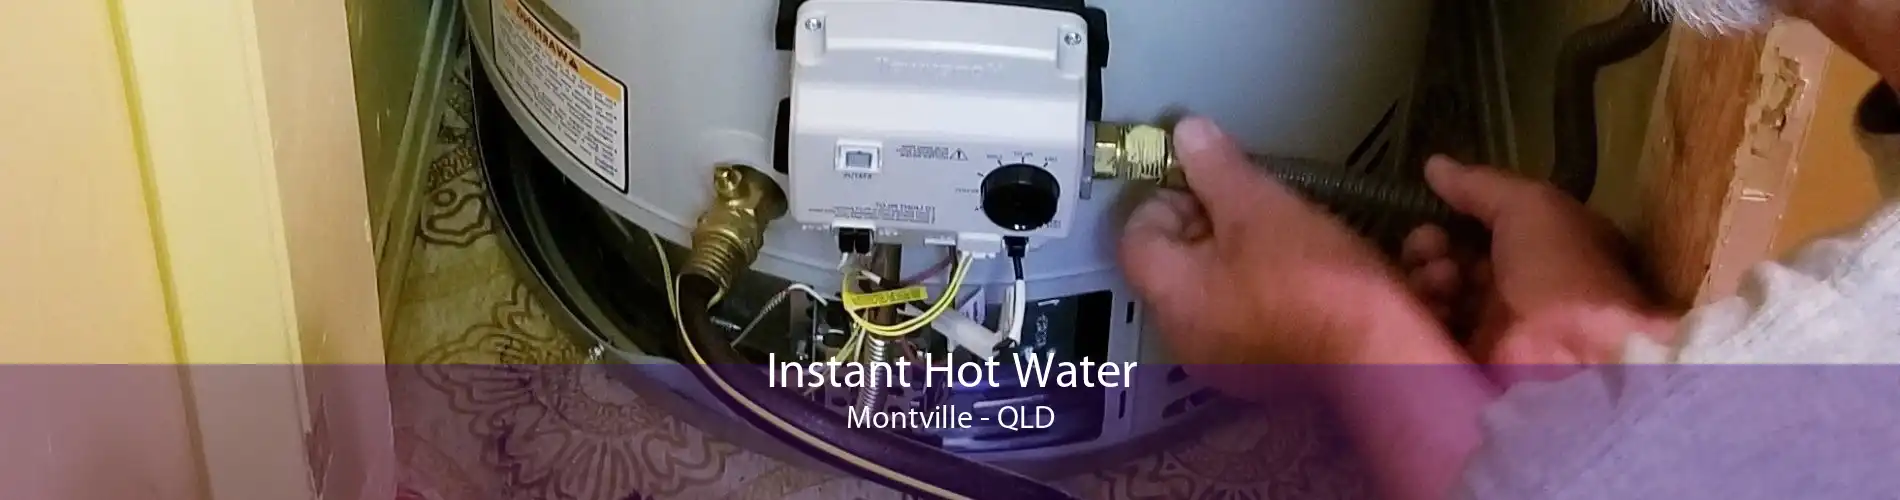 Instant Hot Water Montville - QLD